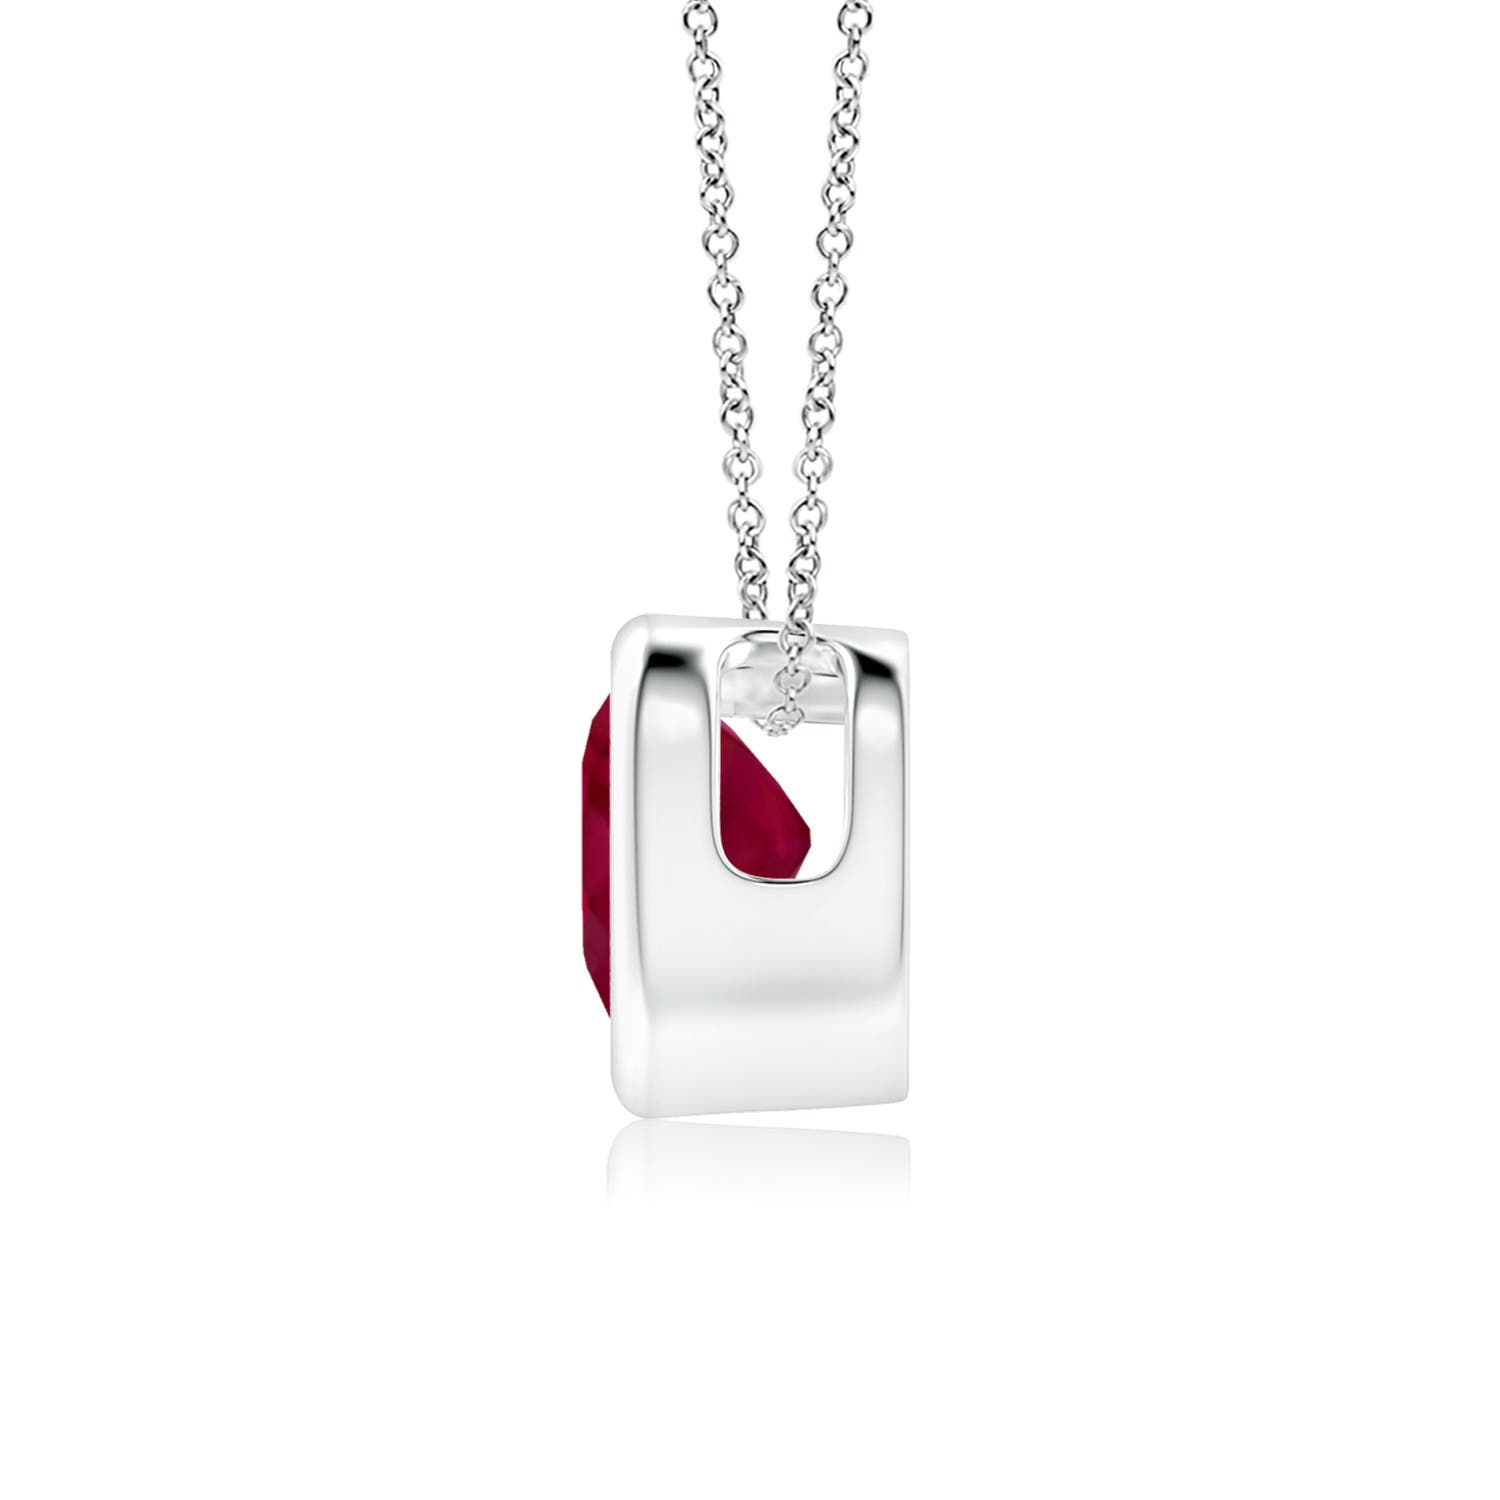 A - Ruby / 0.55 CT / 14 KT White Gold